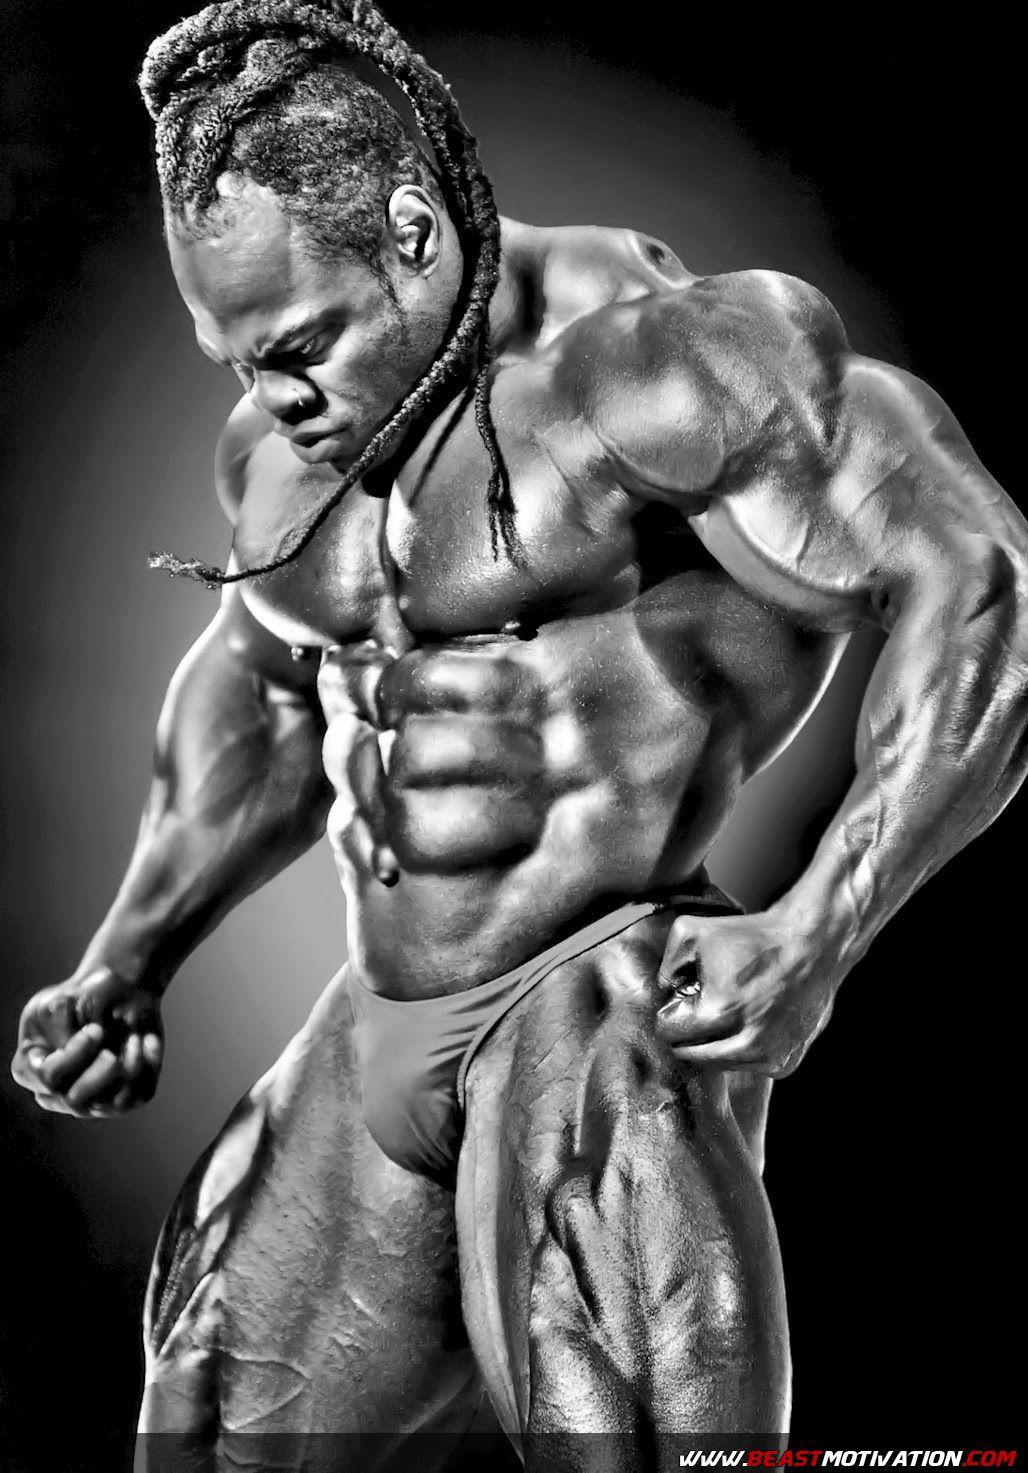 Buy Oyemart Retail Kai Greene Drawing Pencil Art Glass Framed Poster 14x20  Inch Online at Low Prices in India - Amazon.in